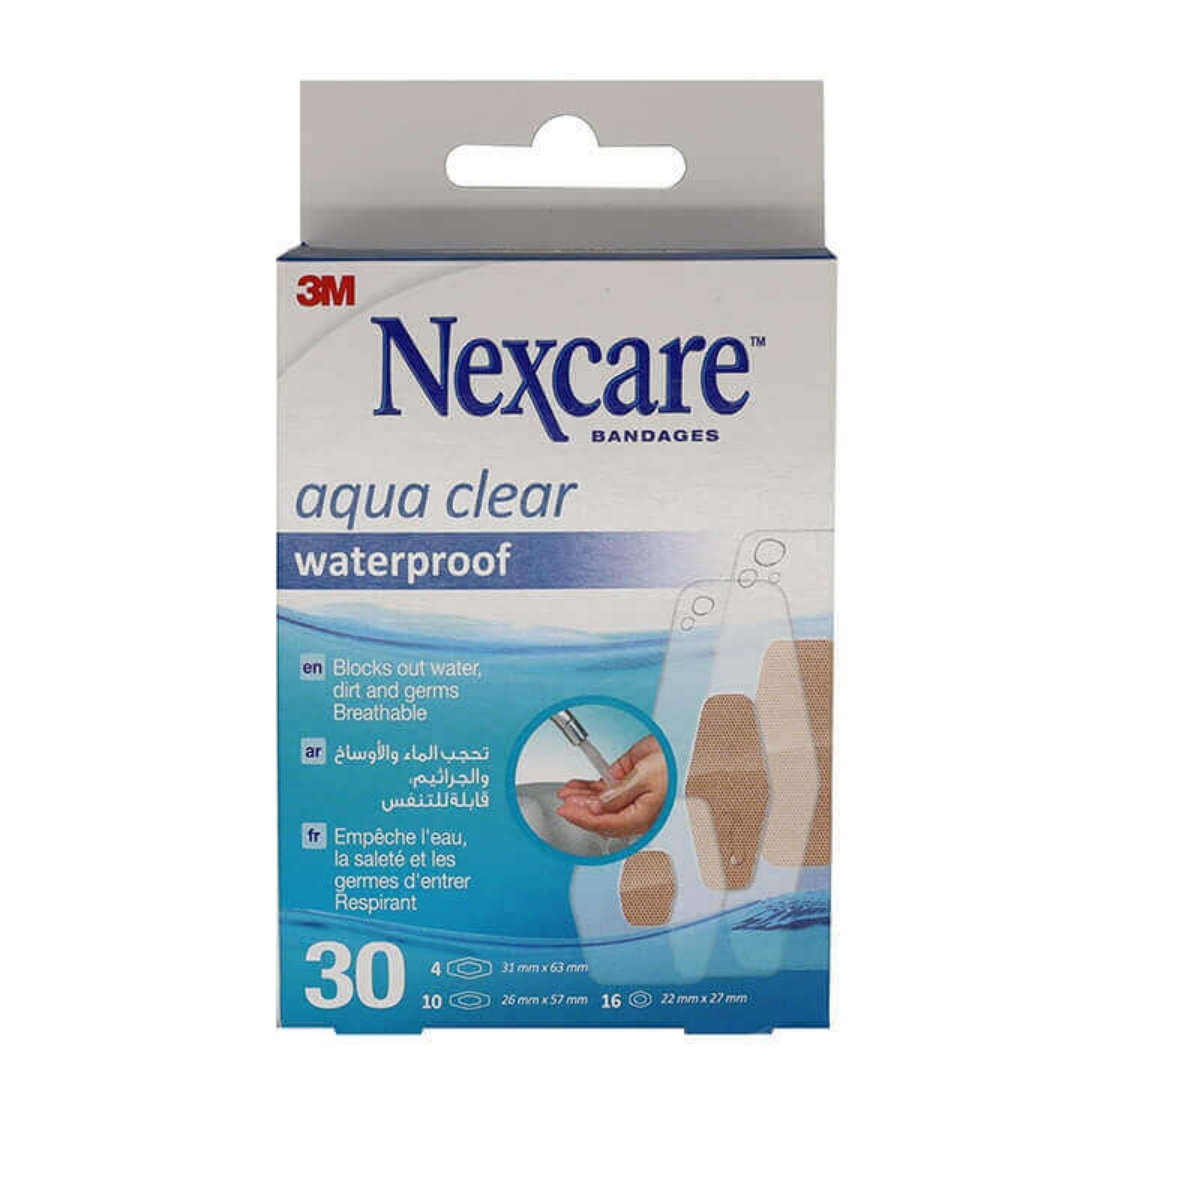 Nexcare™ Clear Waterproof Bandages 588-30-CA, Assorted Sizes, 30/Pack